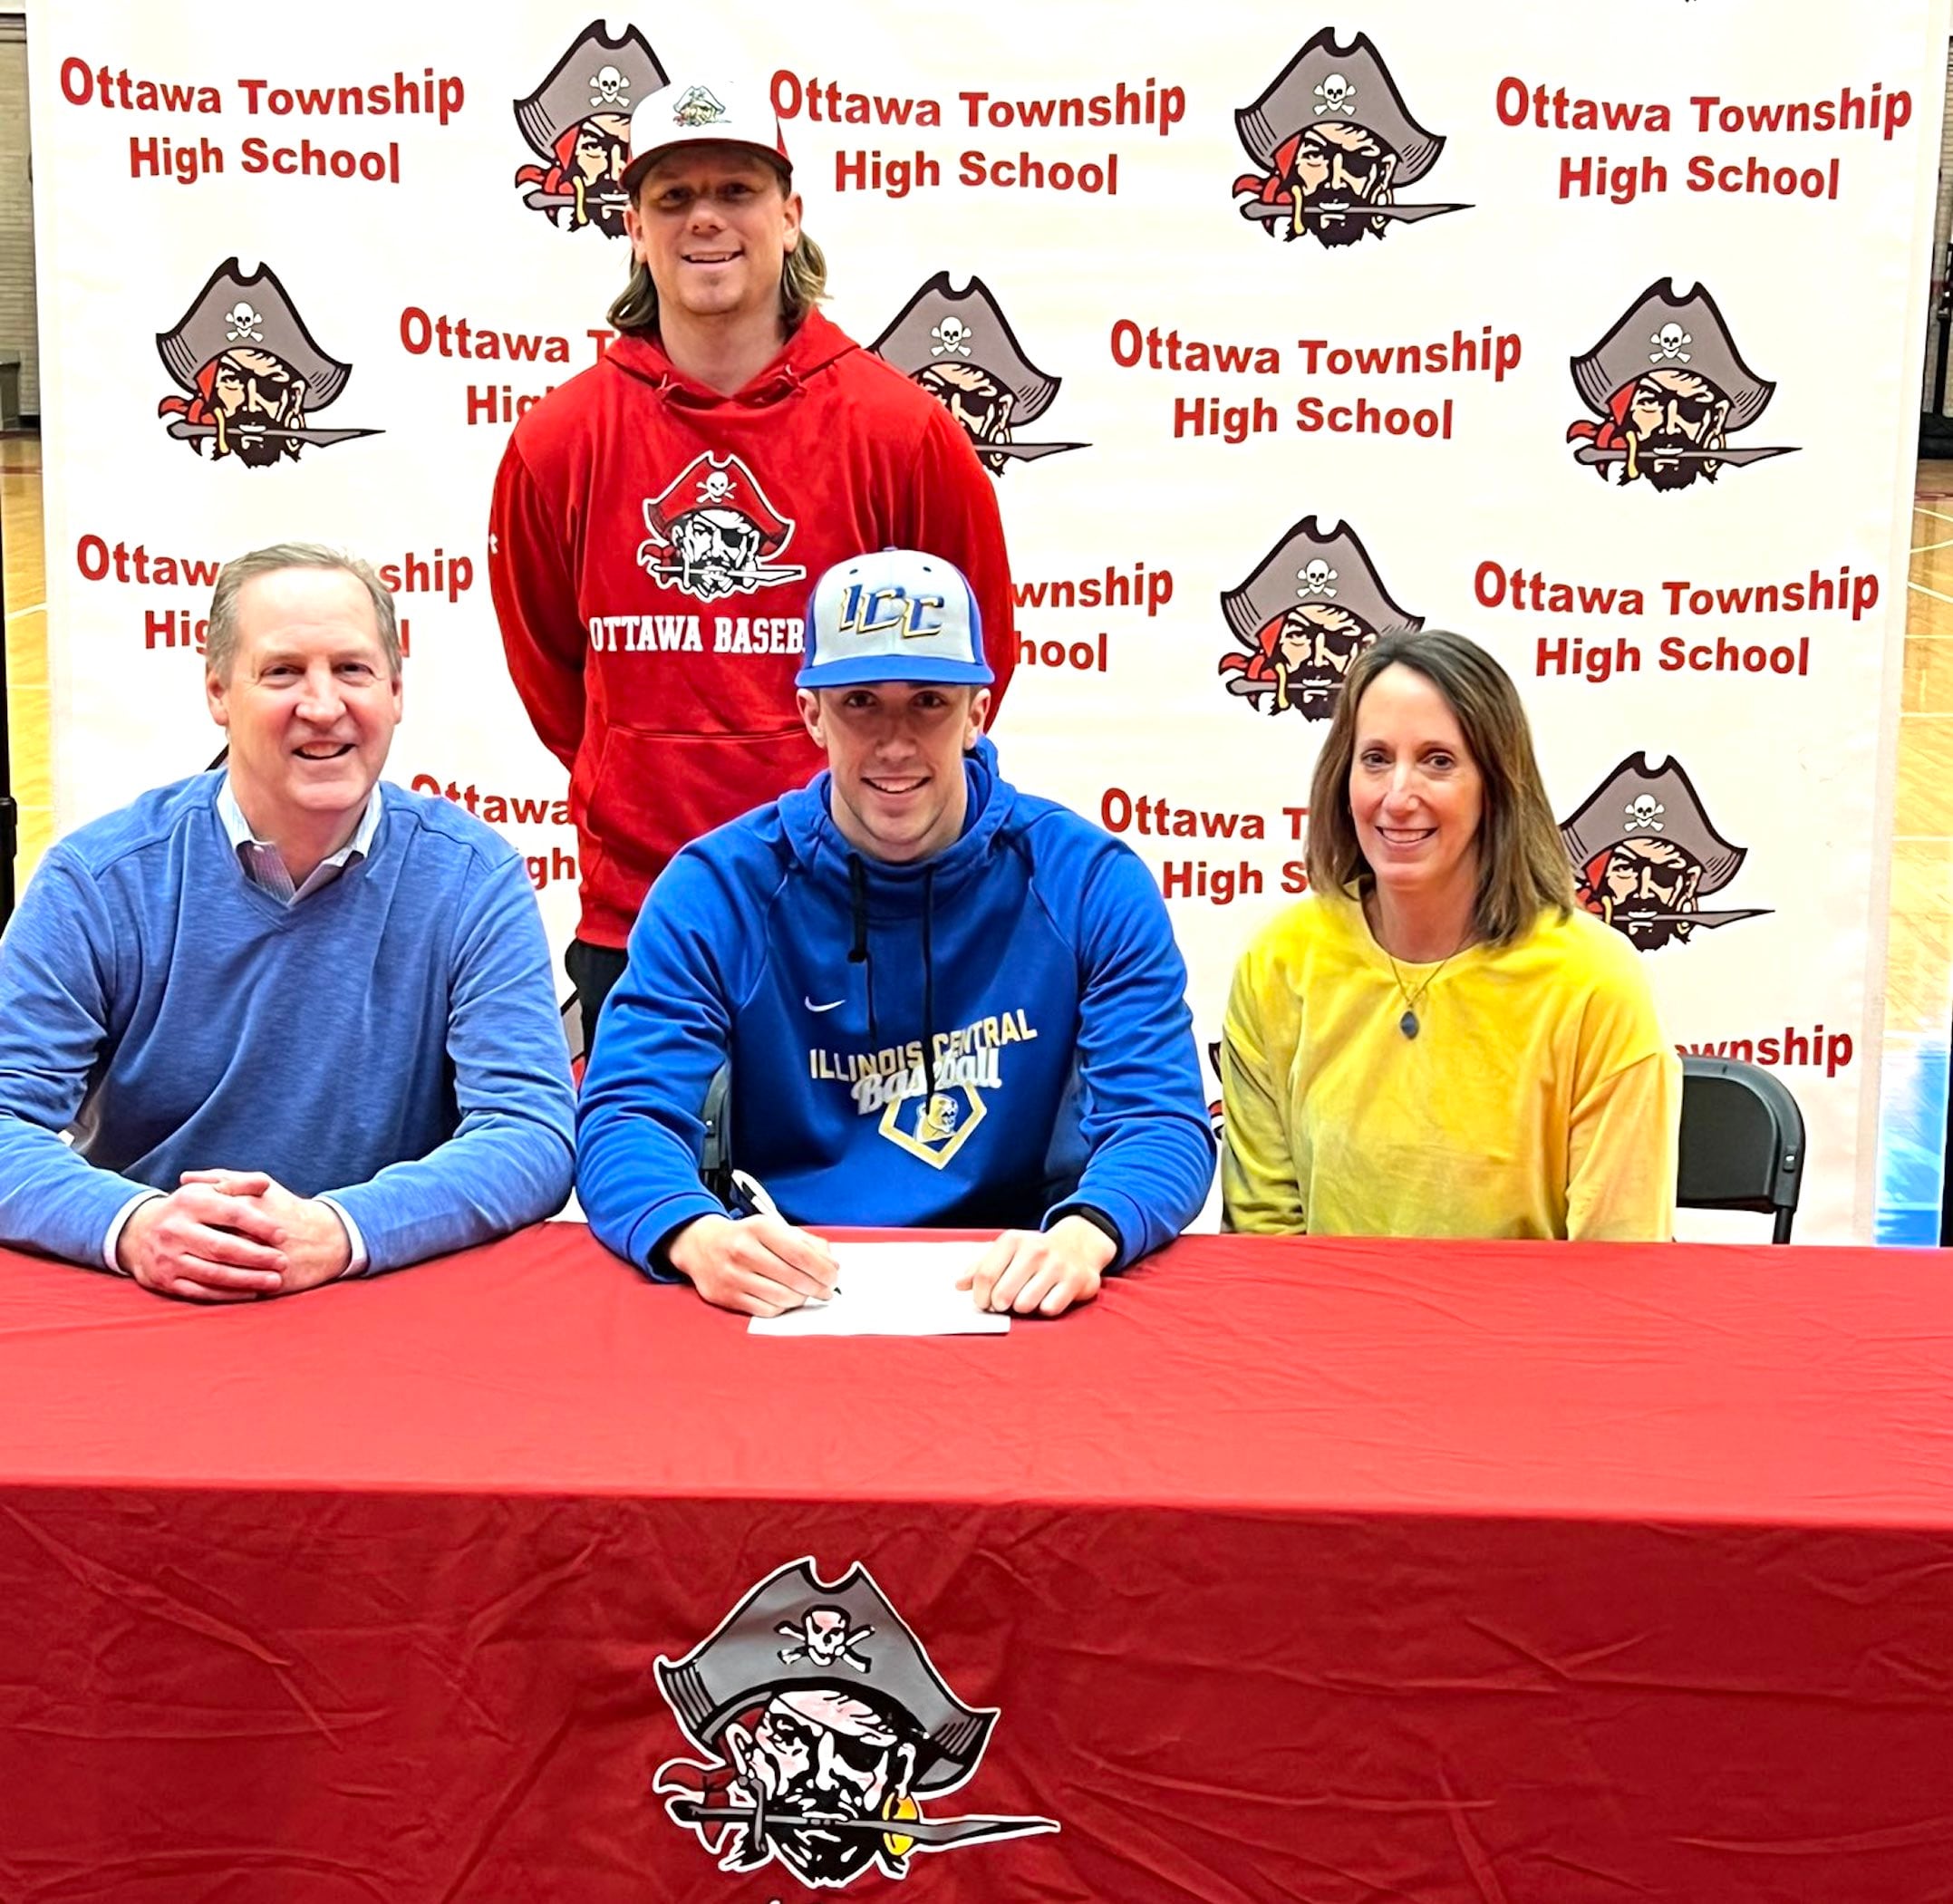 College signing: Ottawa’s Jack Henson commits to play baseball at Illinois Central College